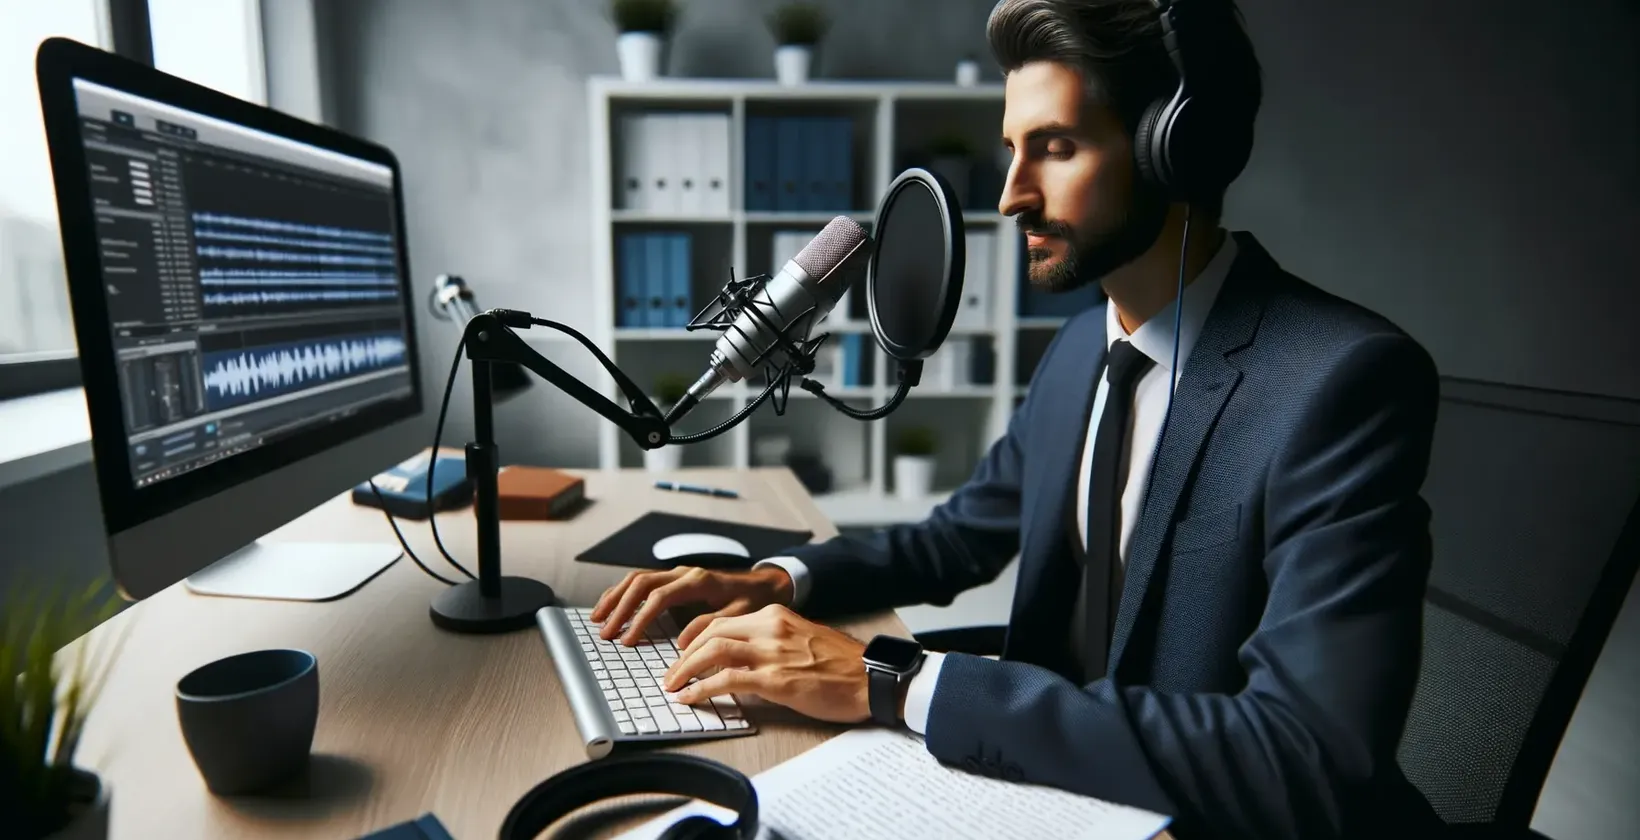 Audio to text to take notes depicted by a professional in headphones, speaking into a studio mic in a modern workspace